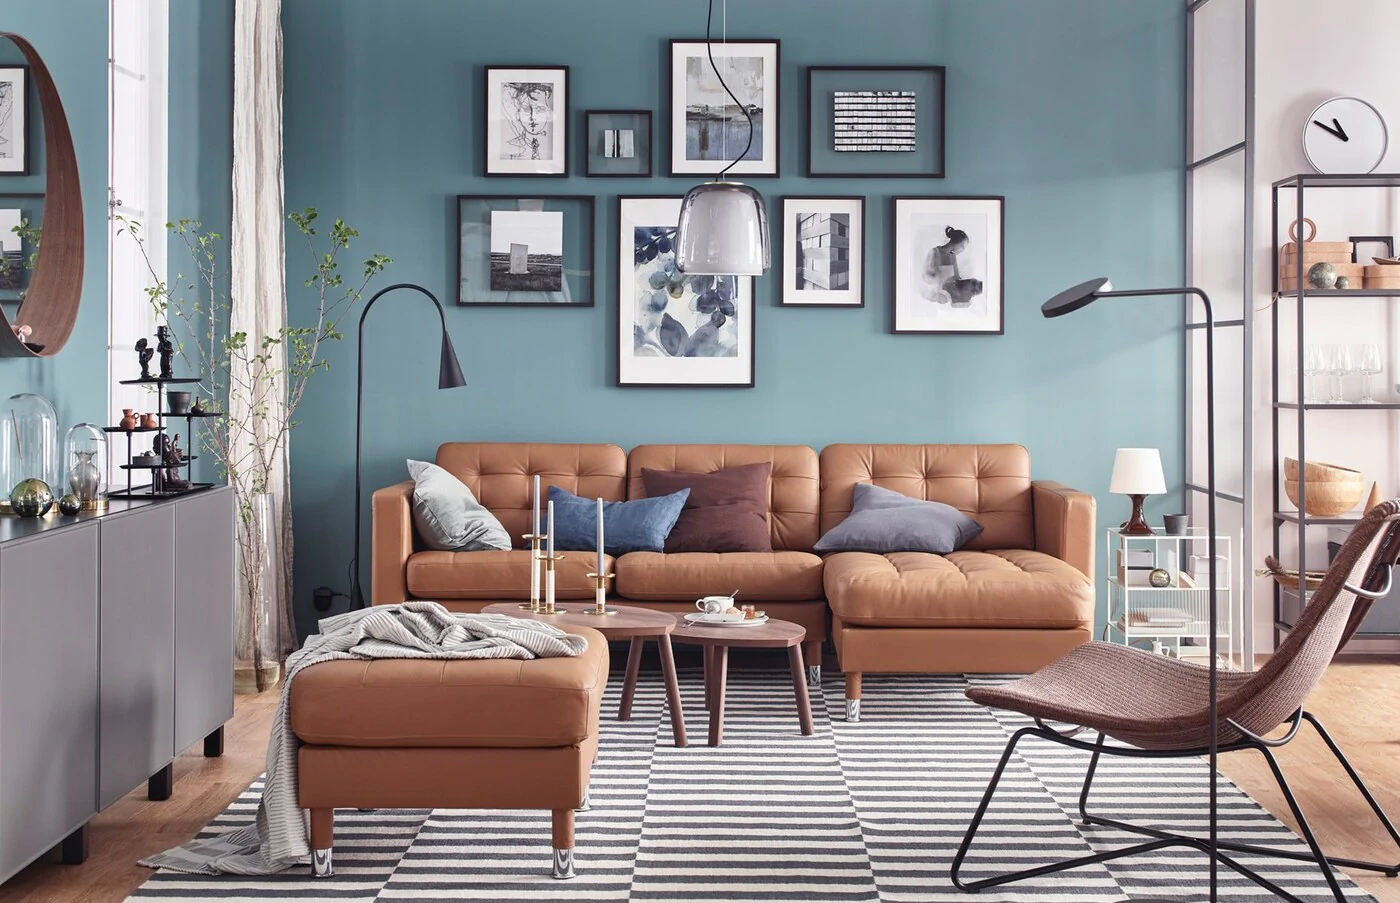 How to design a living room - turquoise and brown